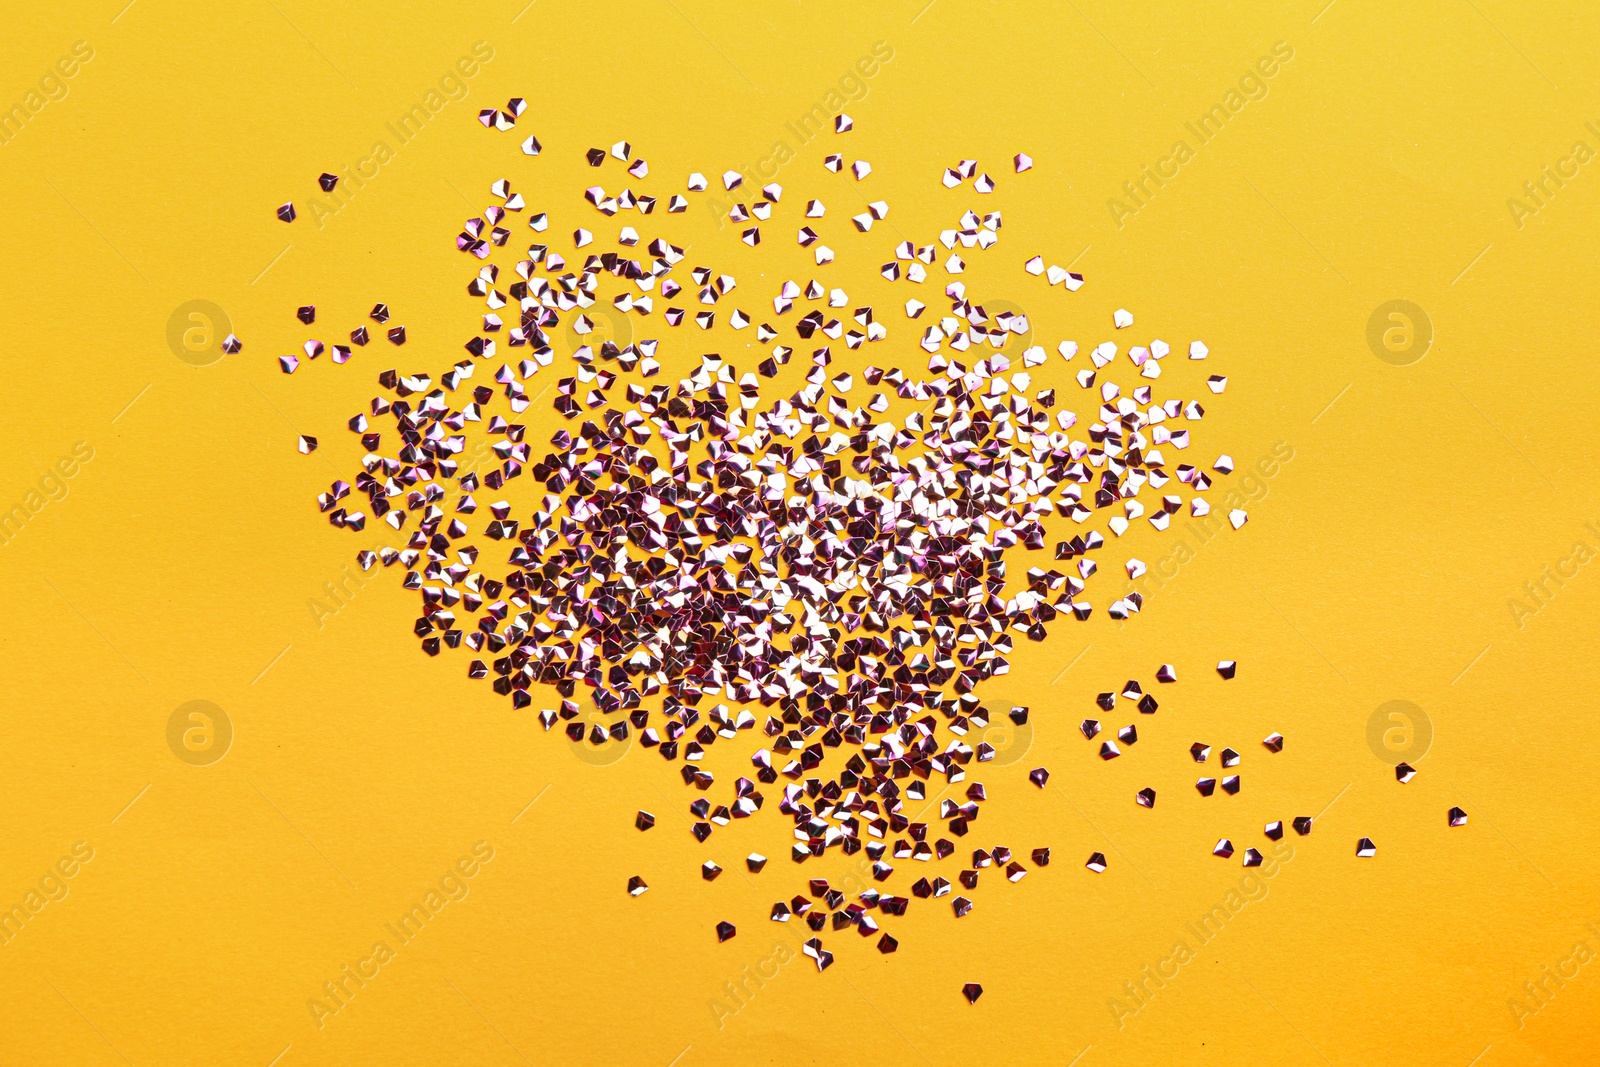 Photo of Shiny bright violet glitter on yellow background, flat lay